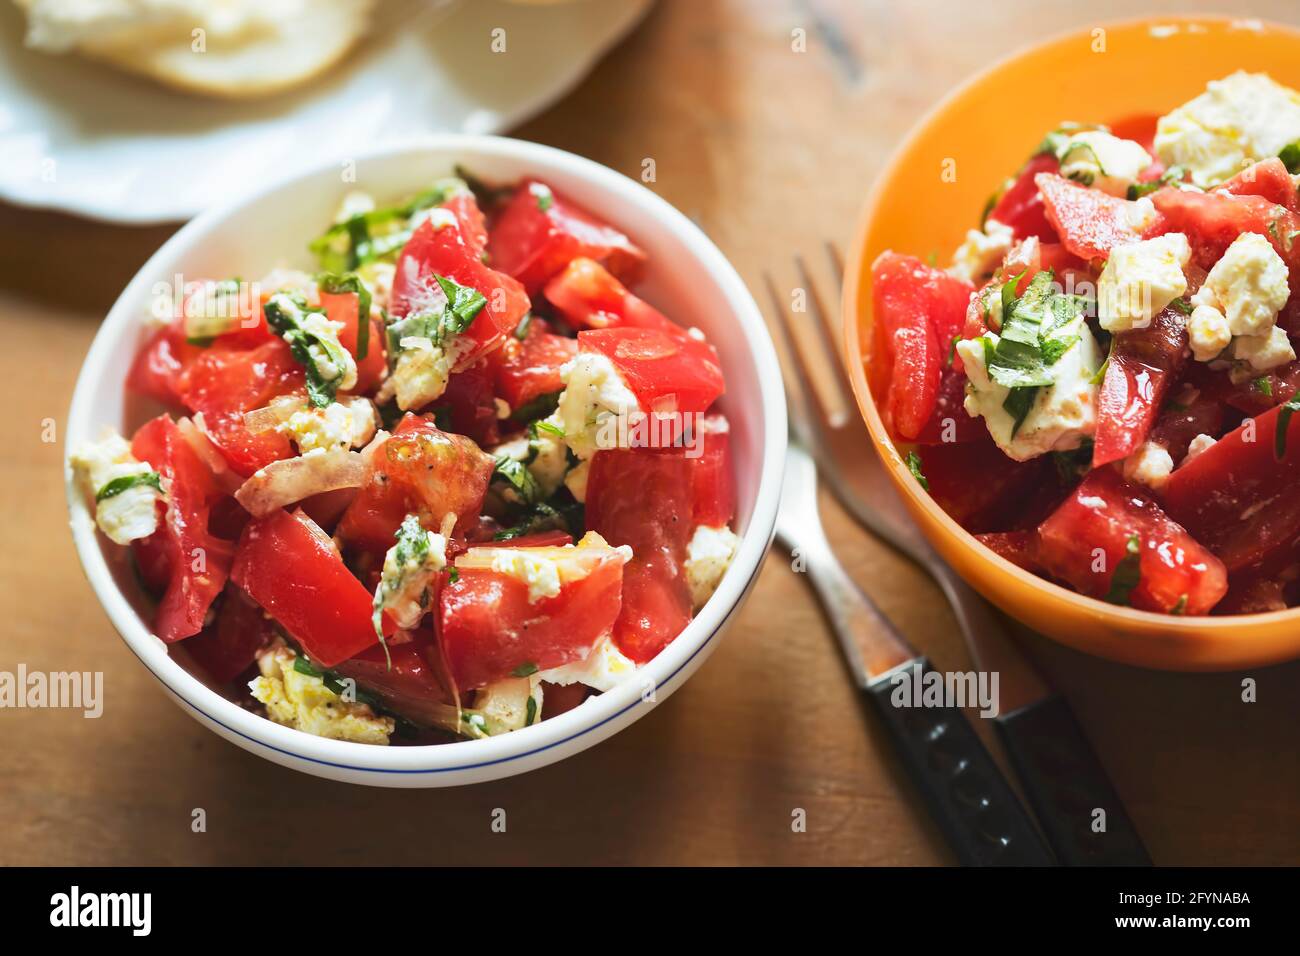 Tomatoes, feta basil salad with roll Stock Photo